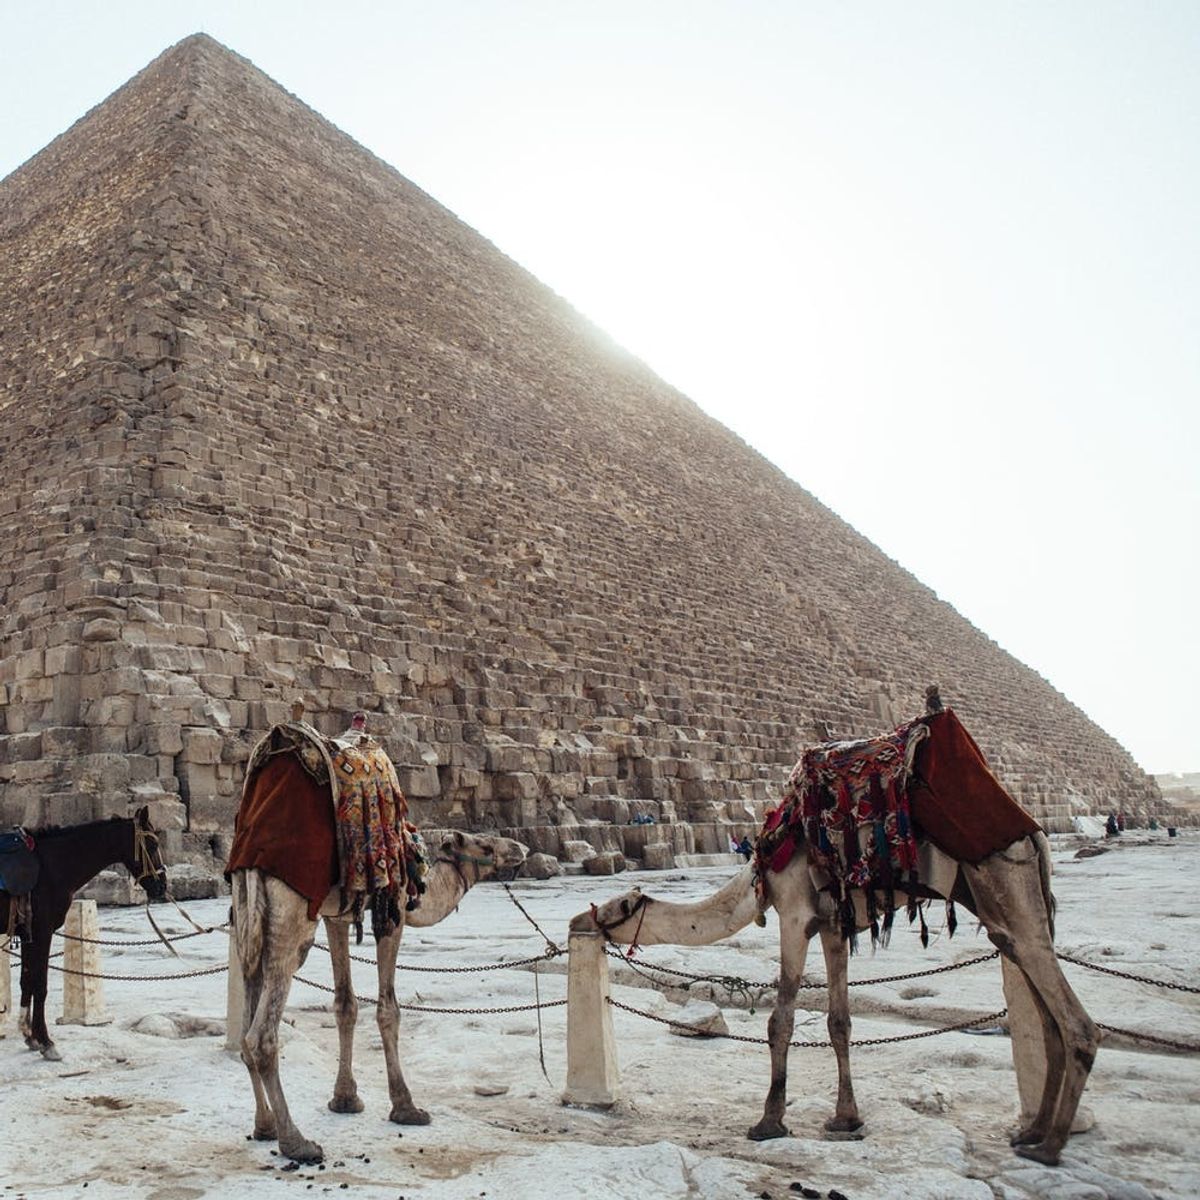 Scientists Believe They Have Discovered a *NEW* Secret Chamber in the Great Pyramid of Giza